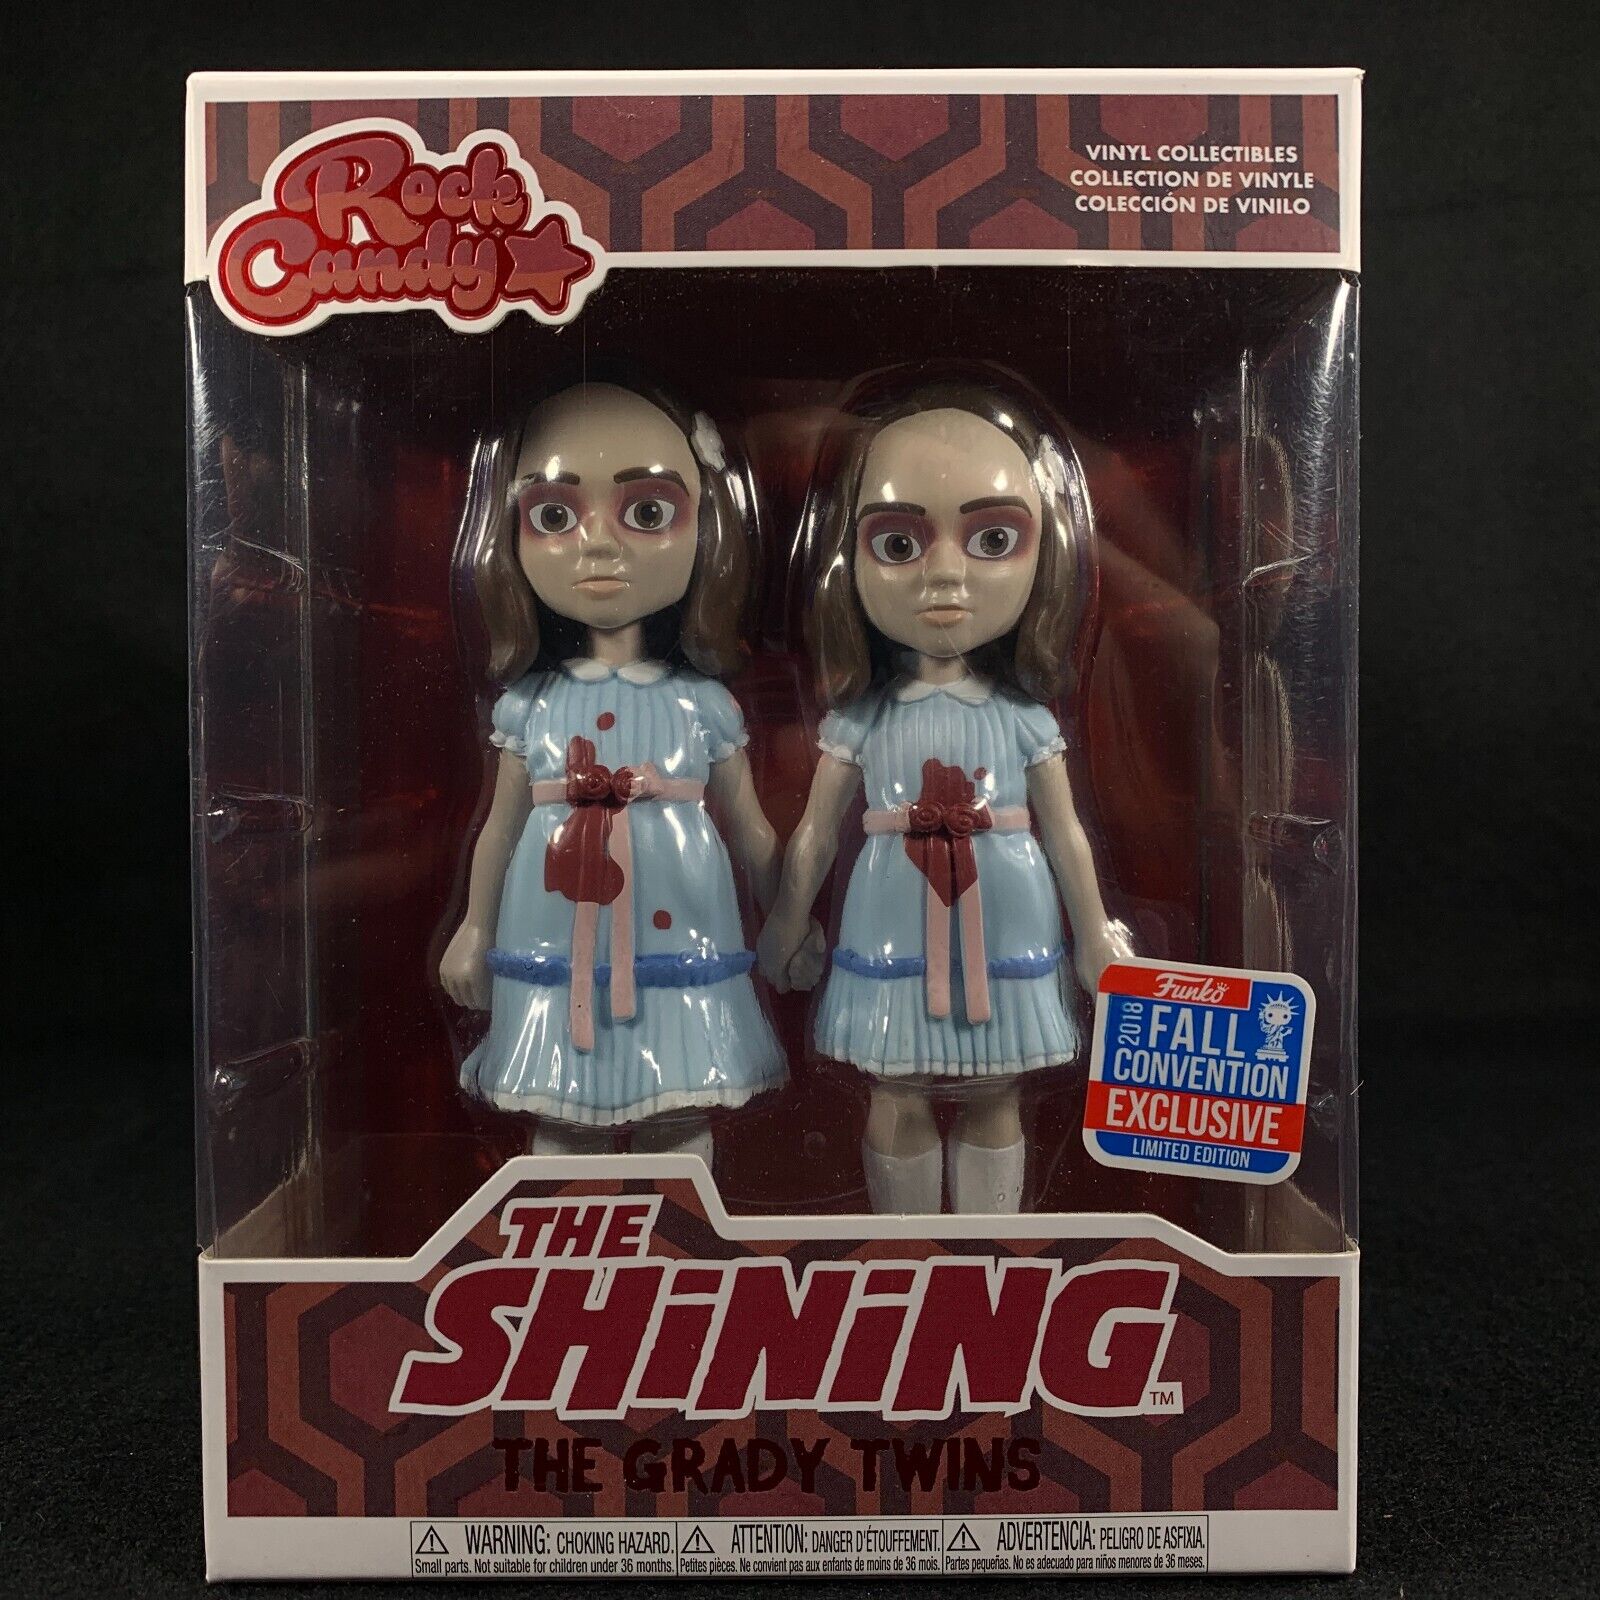 Funko Rock Candy The Shining The Grady Twins 2018 Fall Convention Exclusive